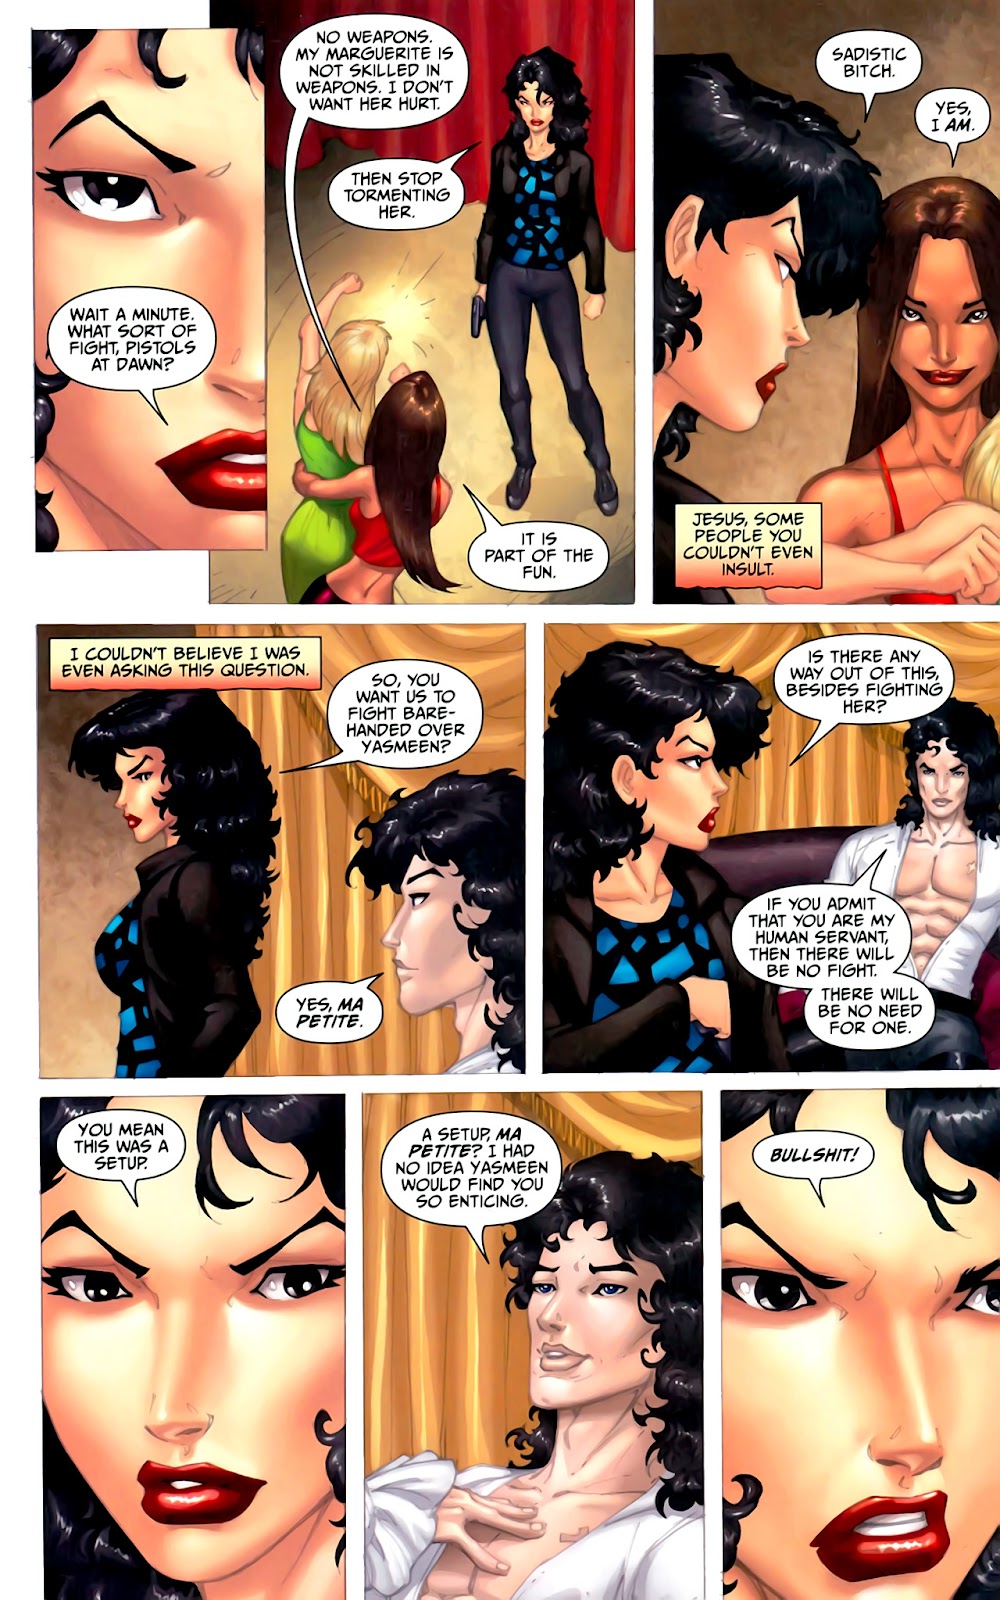 Anita Blake, Vampire Hunter: Circus of the Damned - The Charmer issue 2 - Page 22